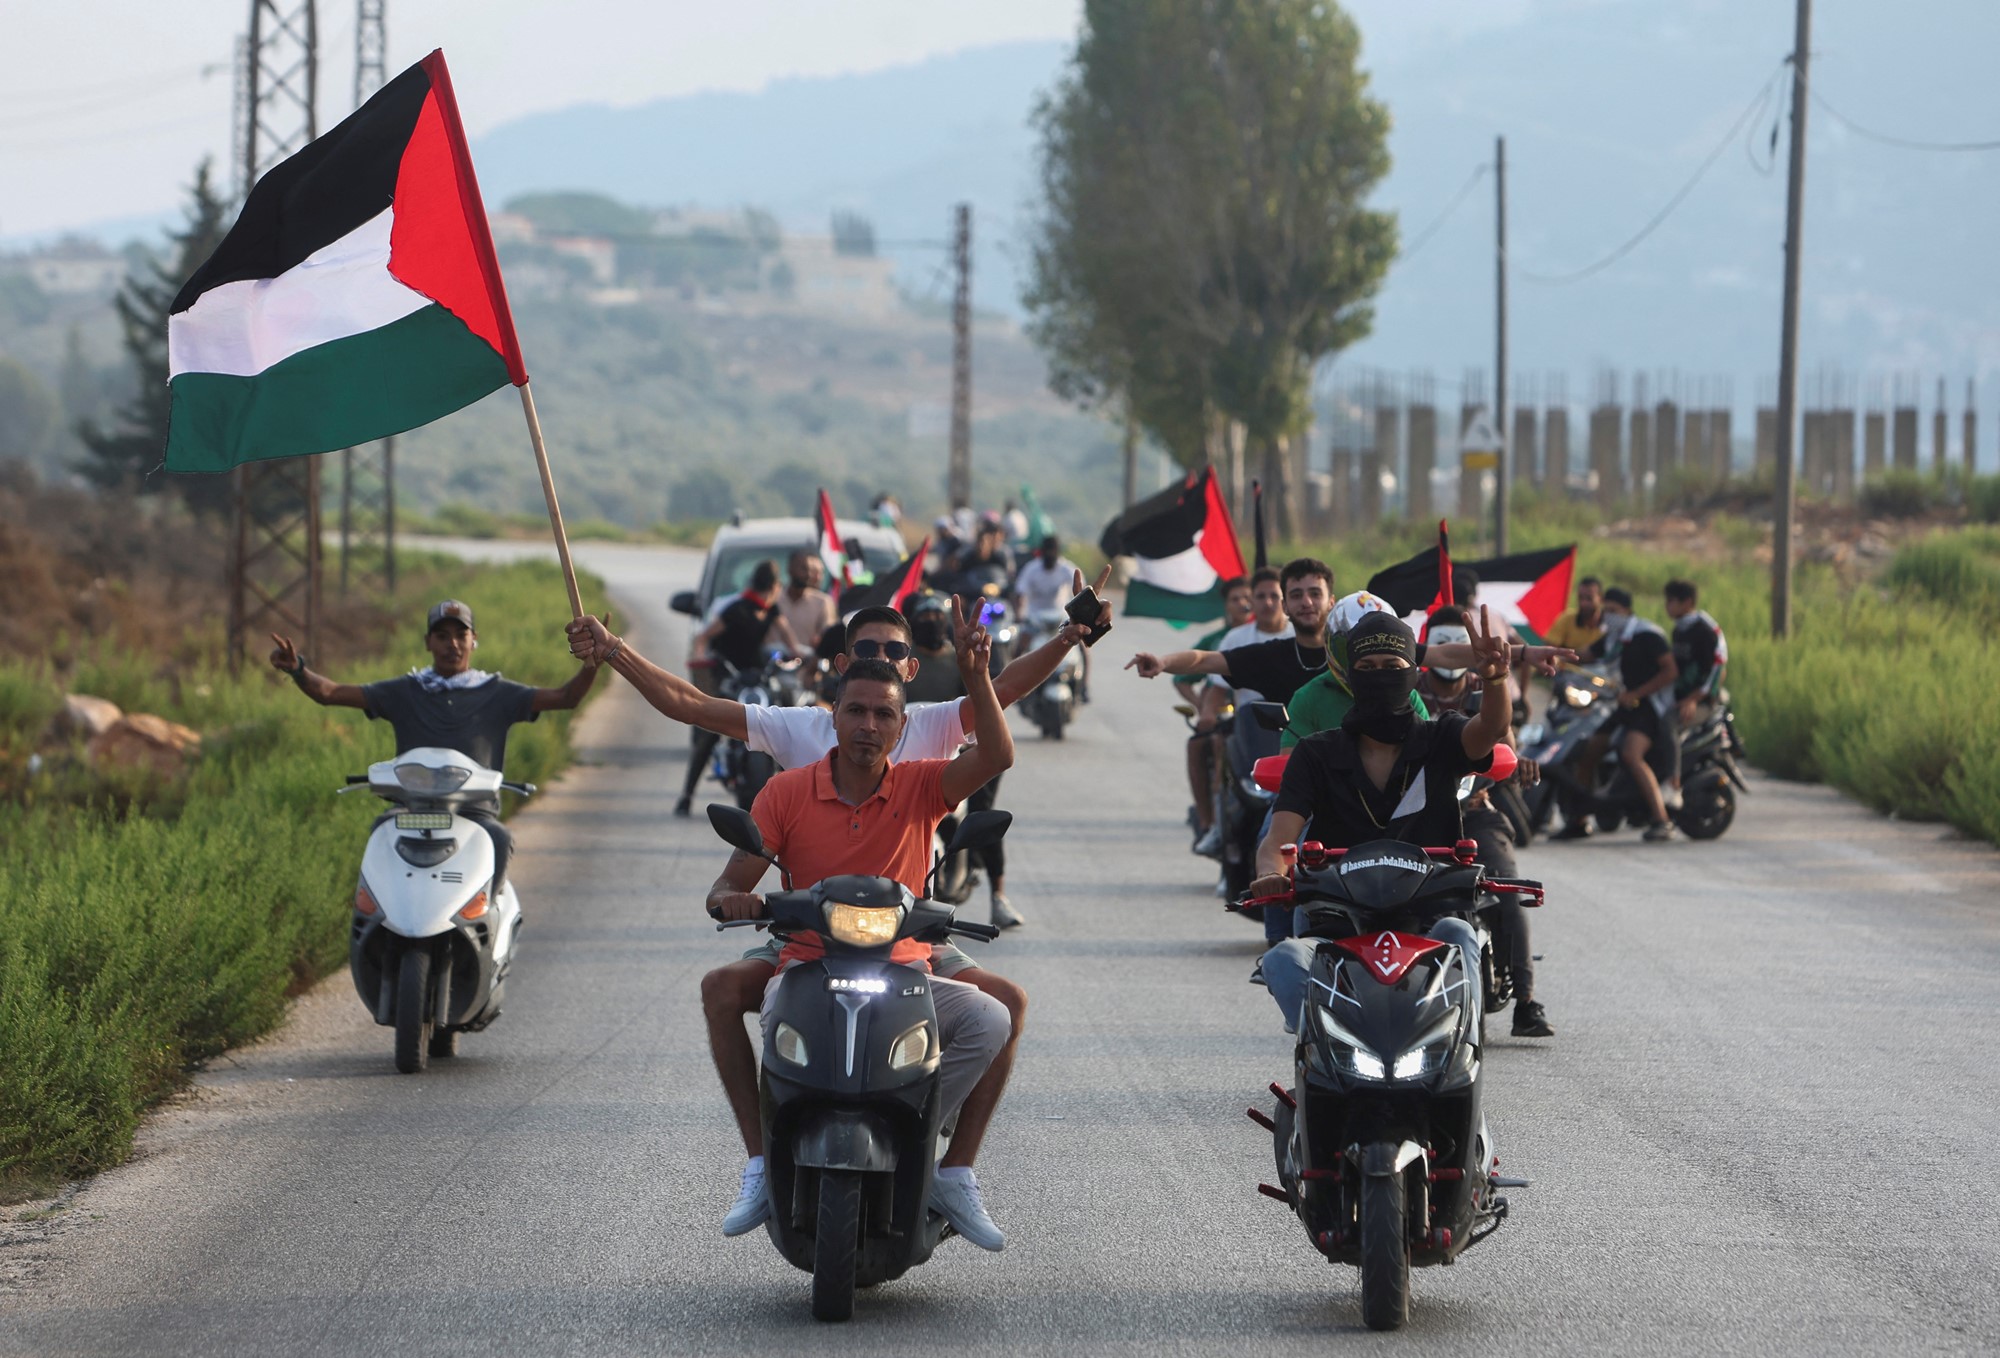 Several men on motorbikes, waving flags and making the peace sign with their hands.